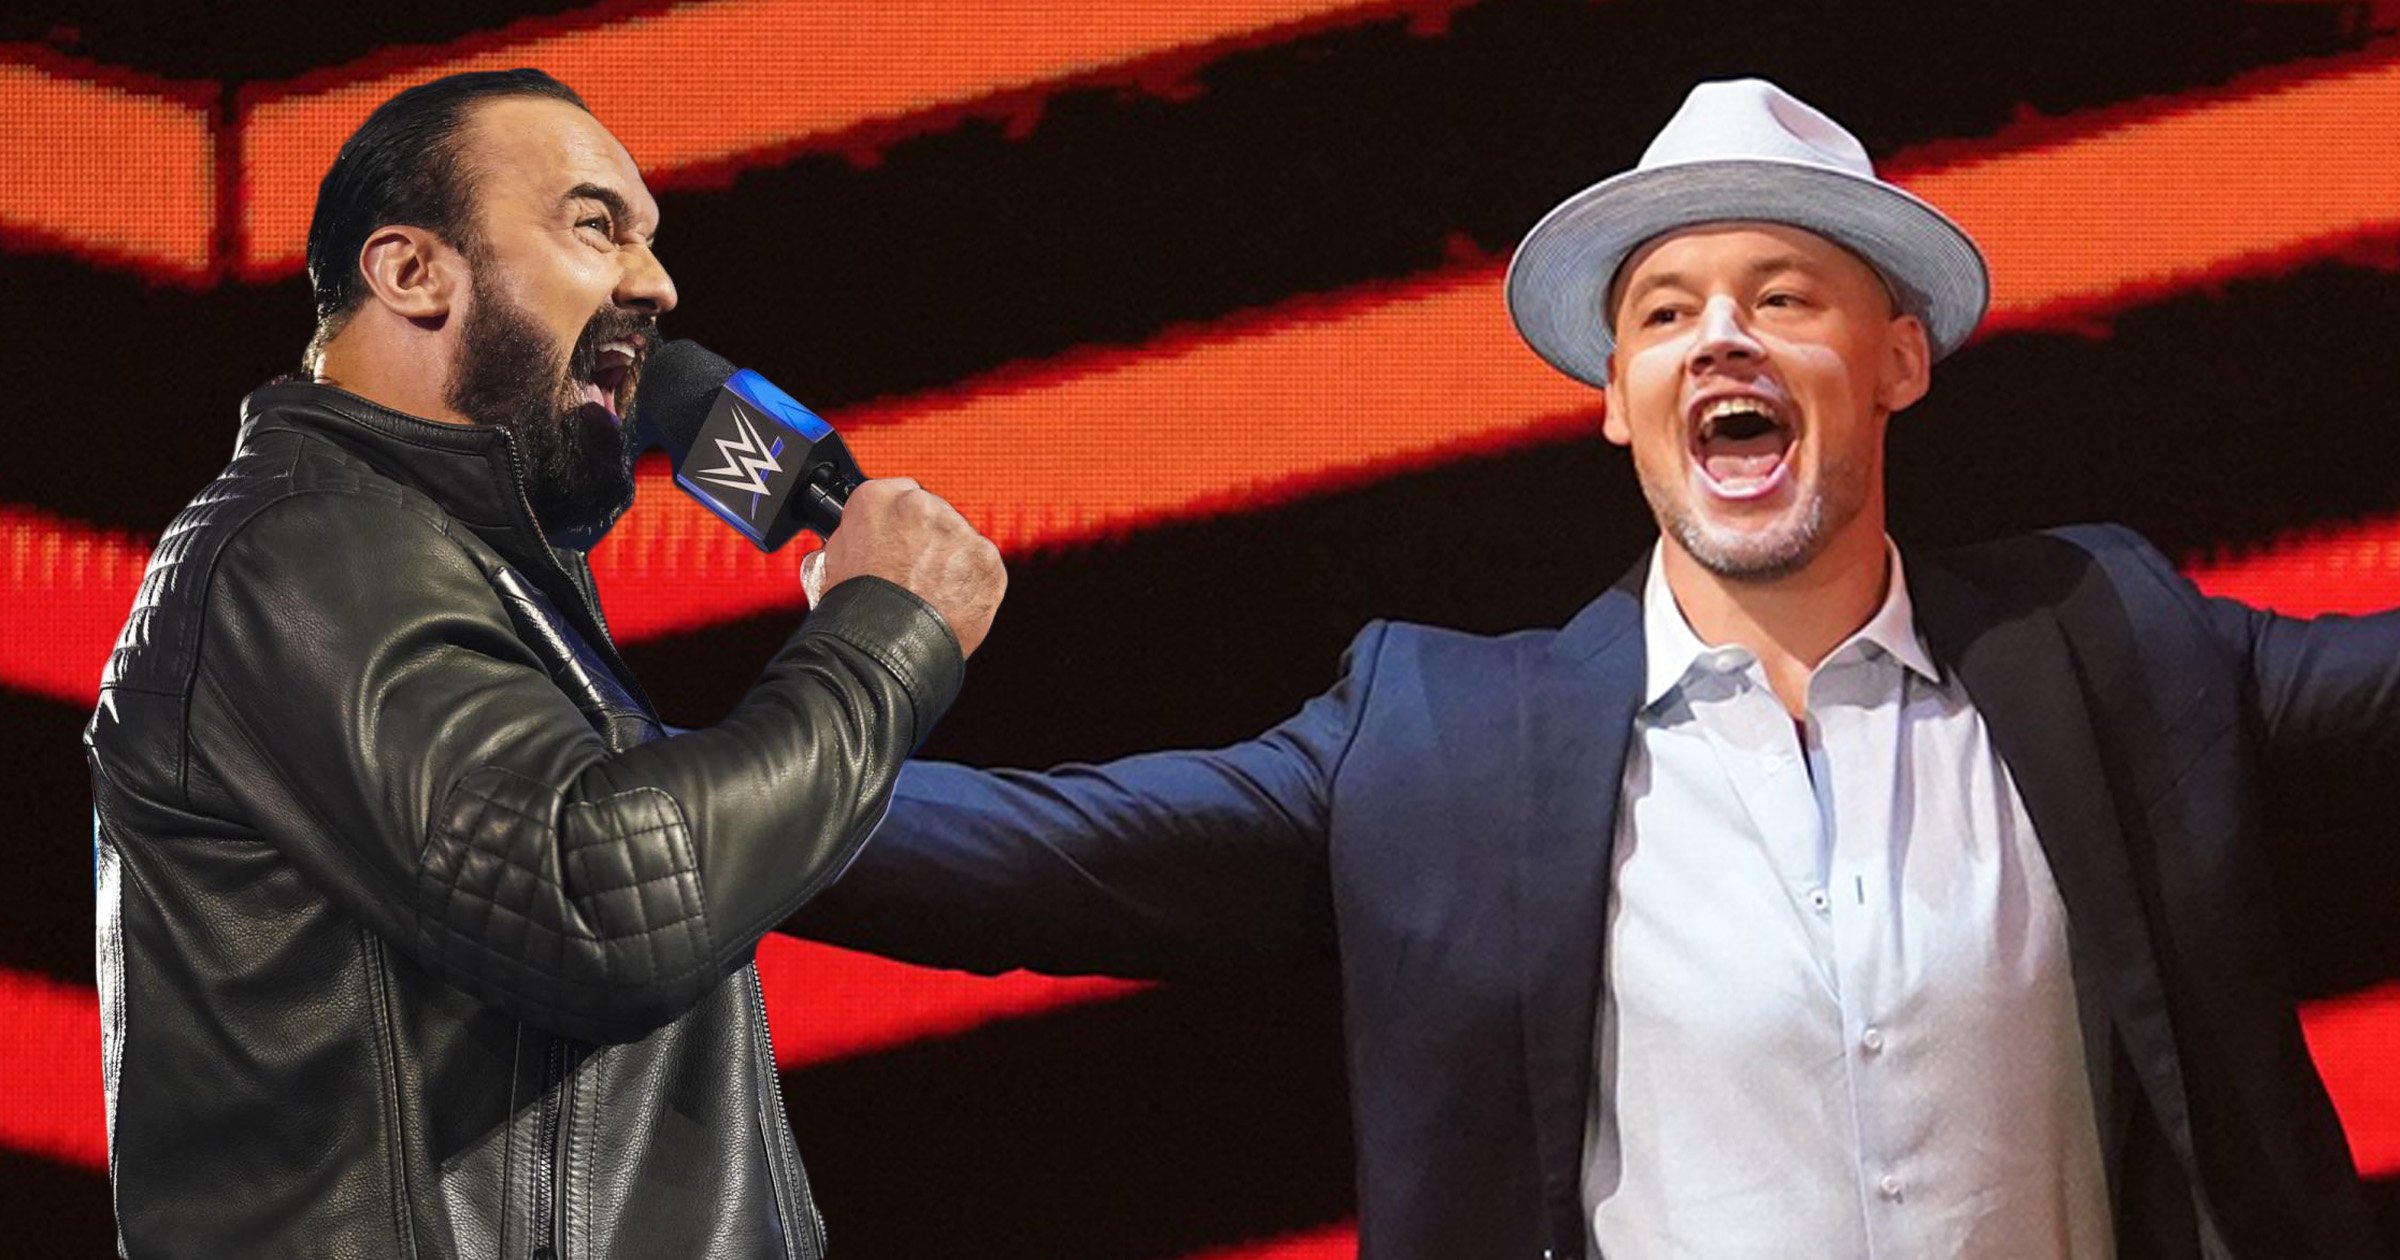 WWE superstars Drew McIntyre and Happy Corbin will face off at WrestleMania 38